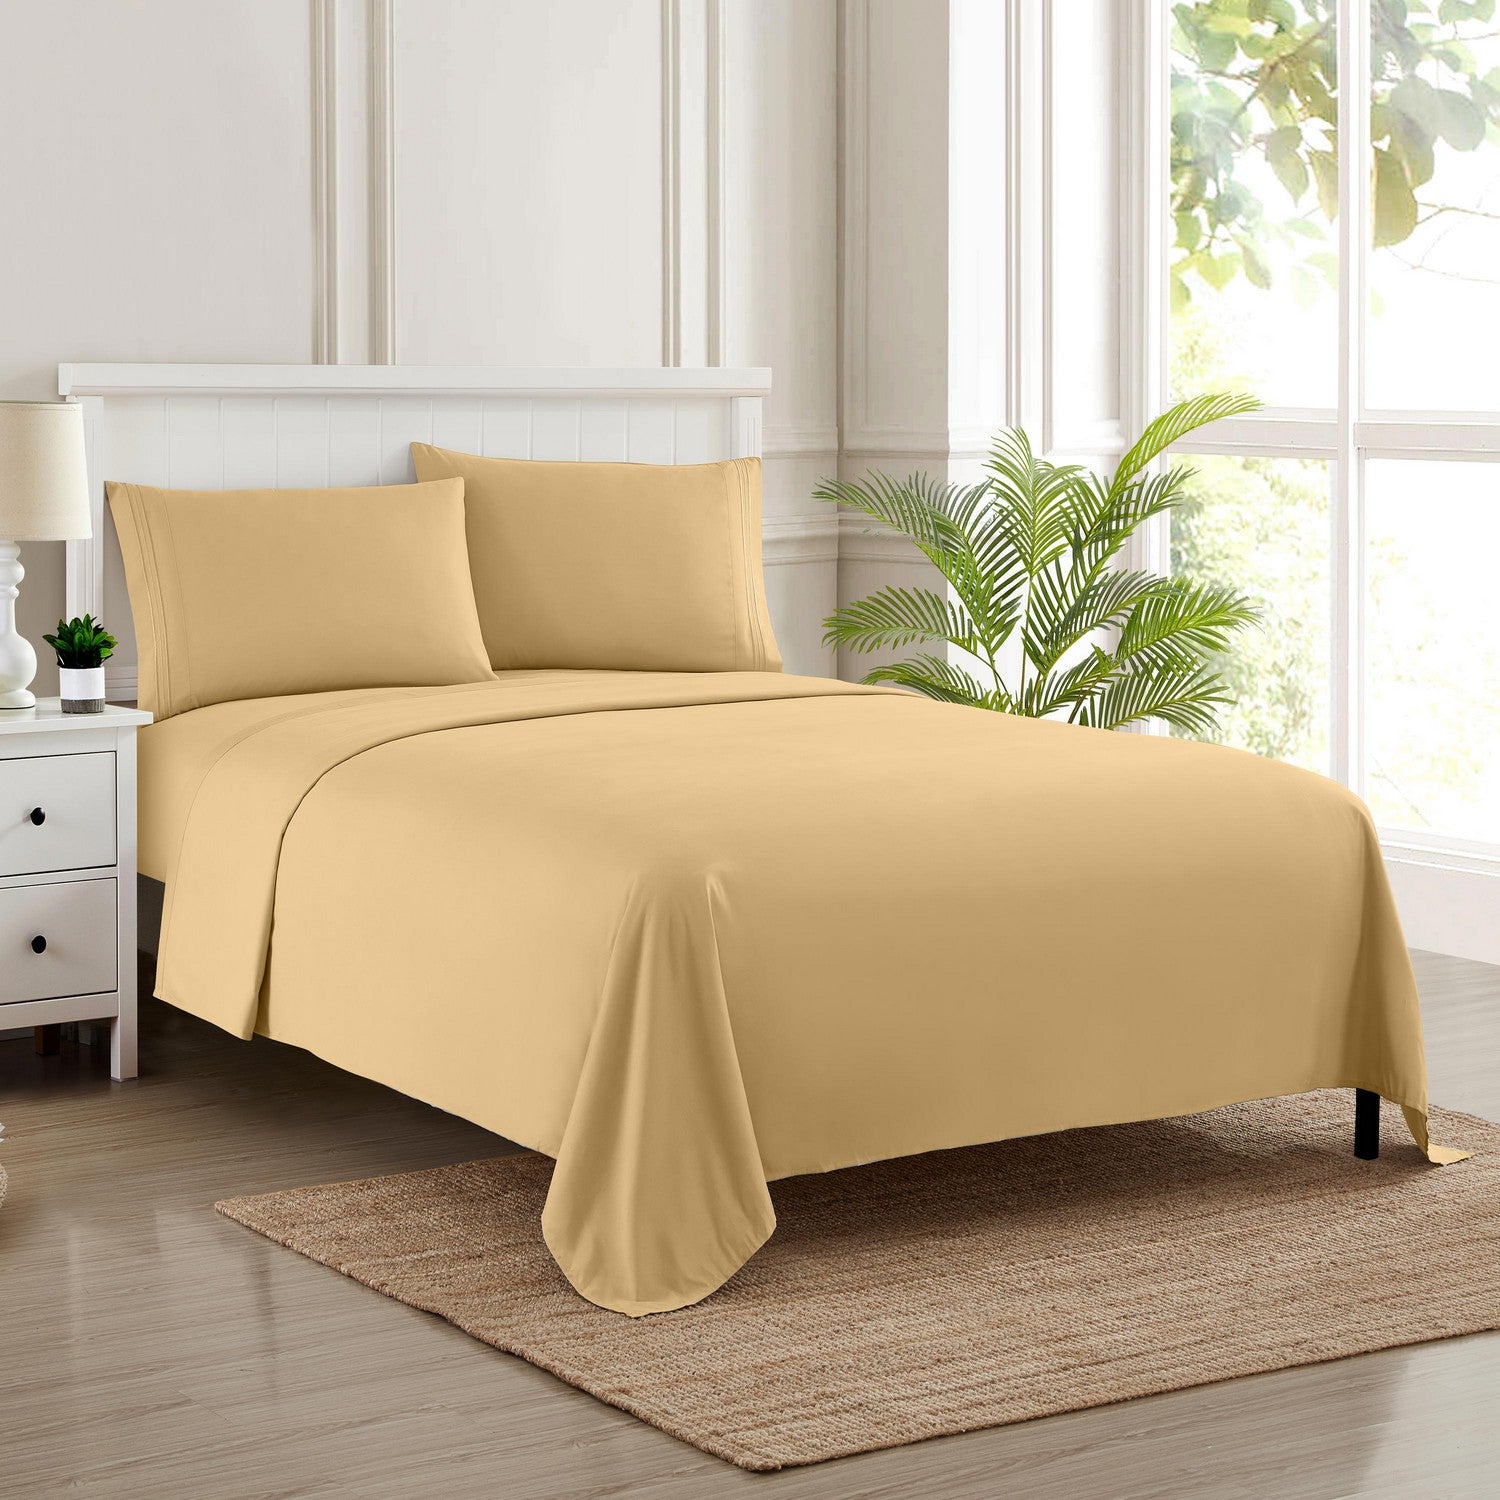 Classic 4-Piece Bed Sheet Set (Camel) - Bed